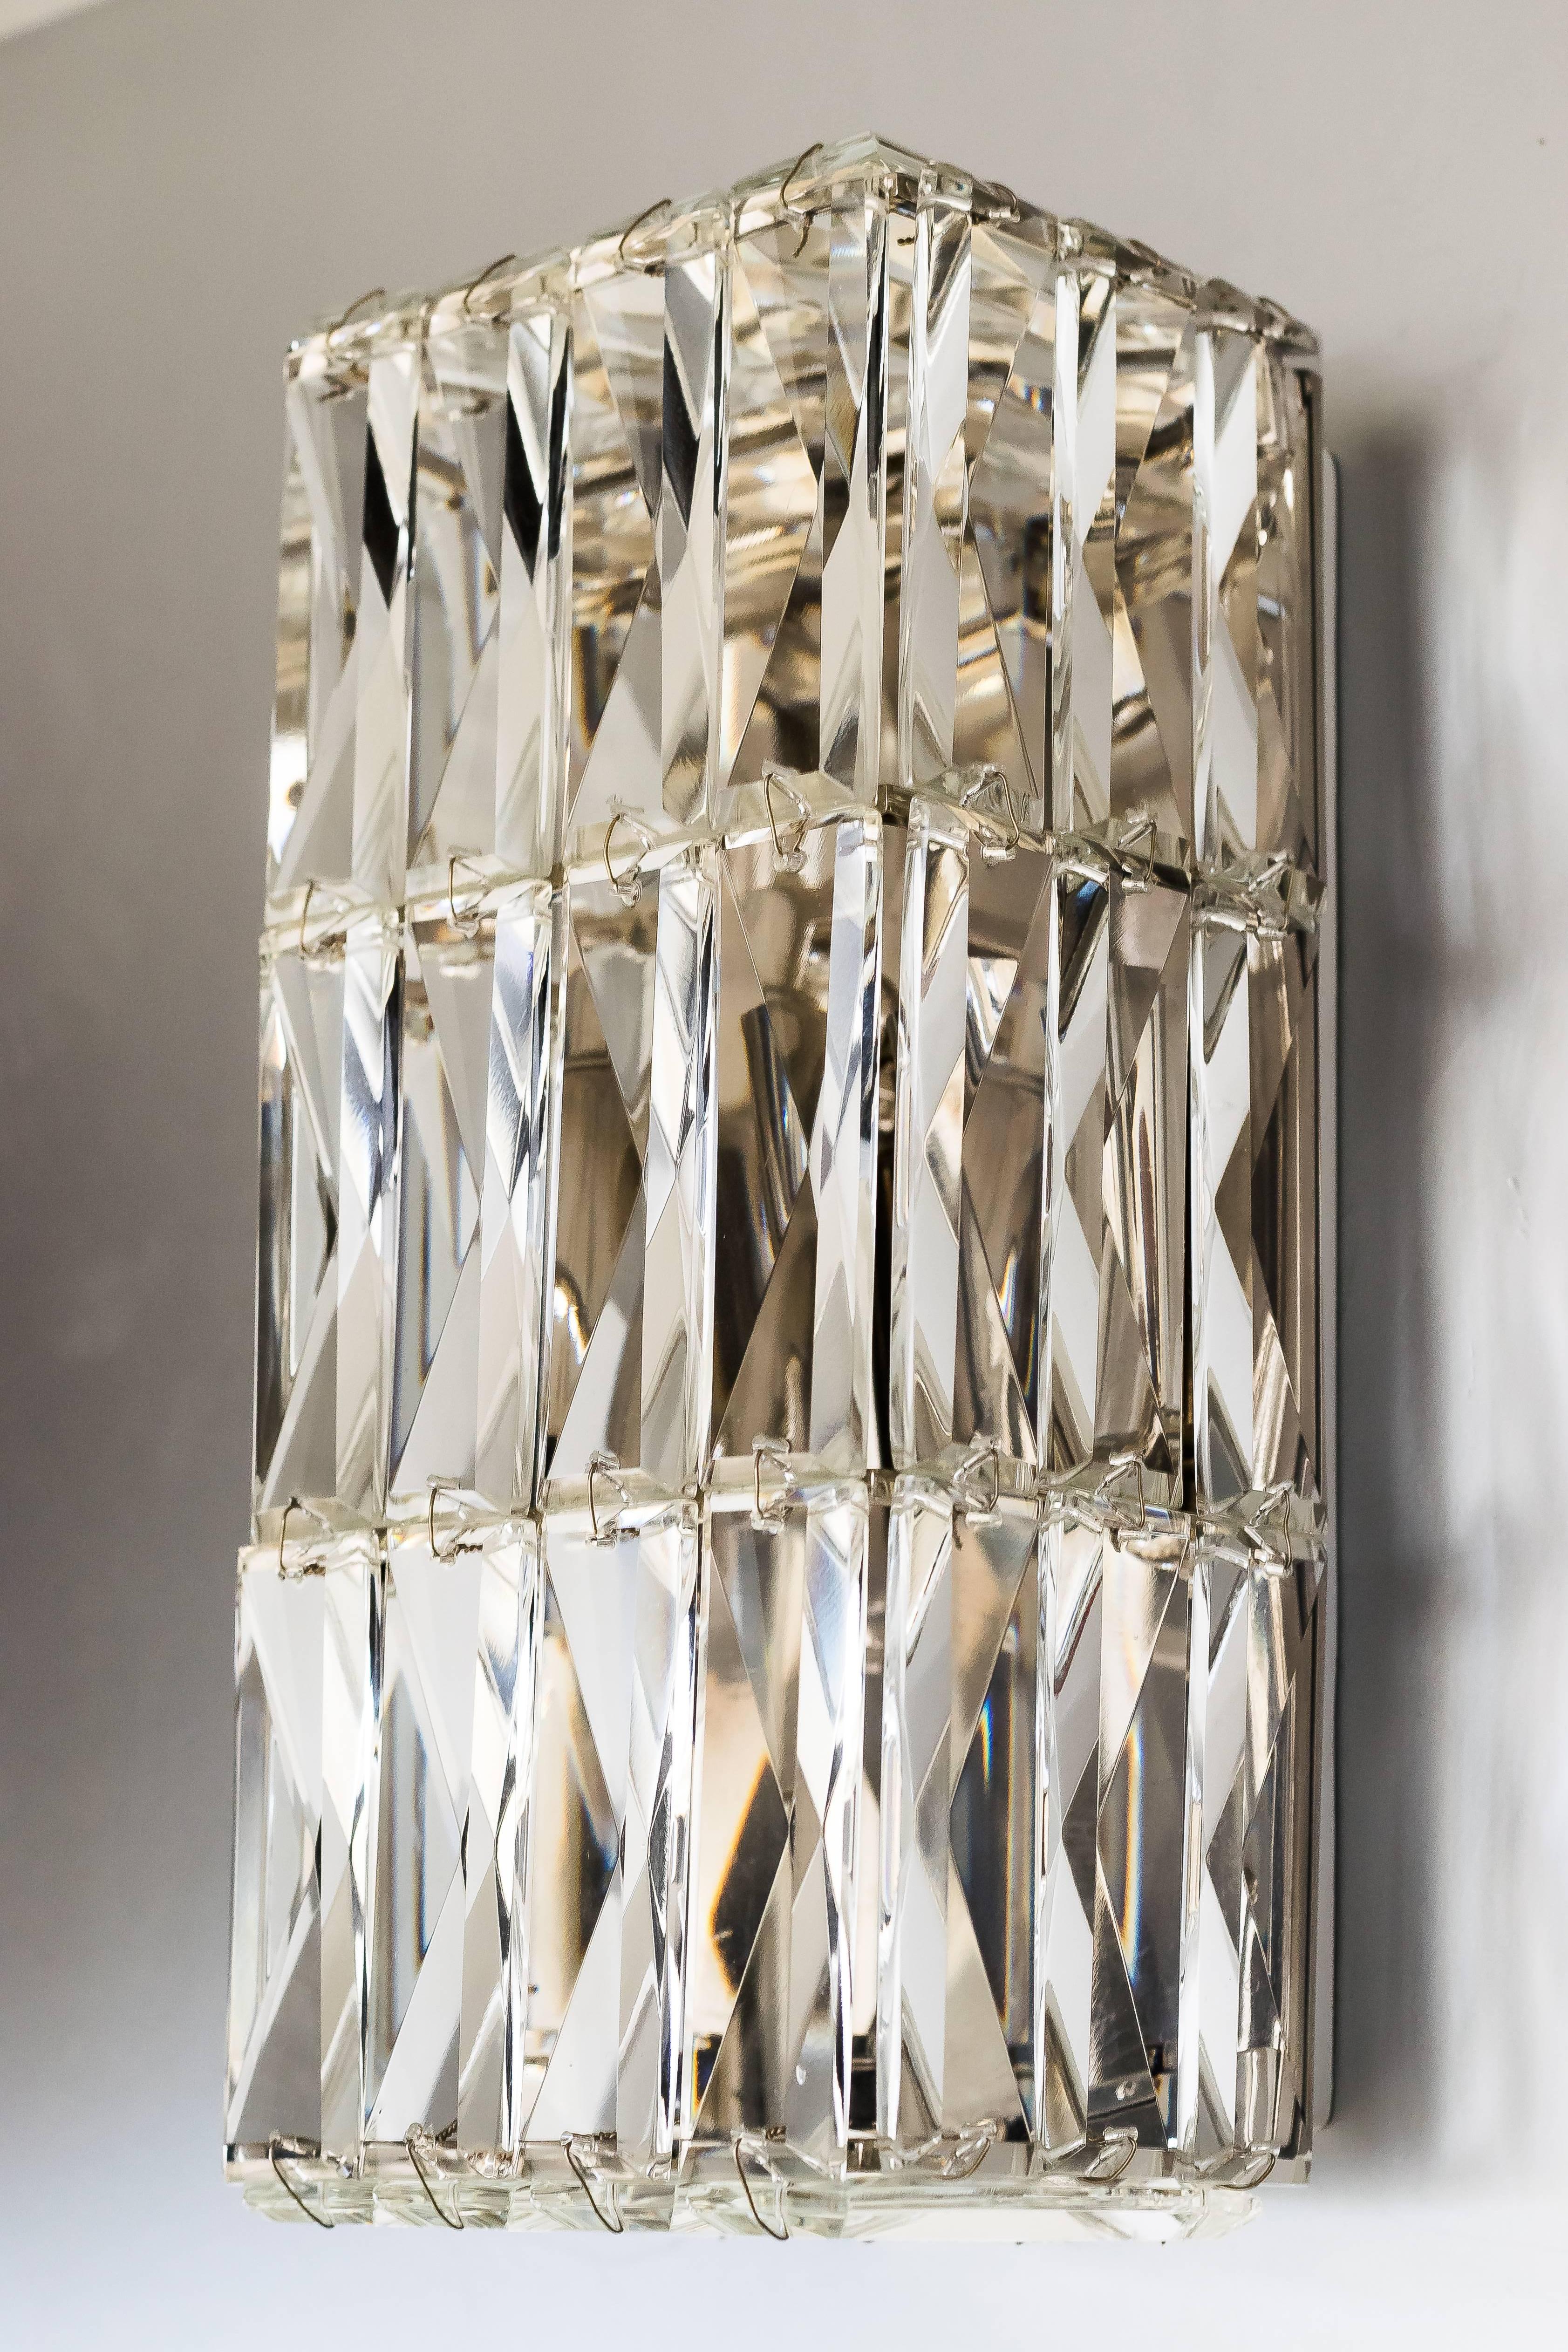 Crystal glass wall lamp manufactured by Bakalowits, Vienna, 1950
Original condition.